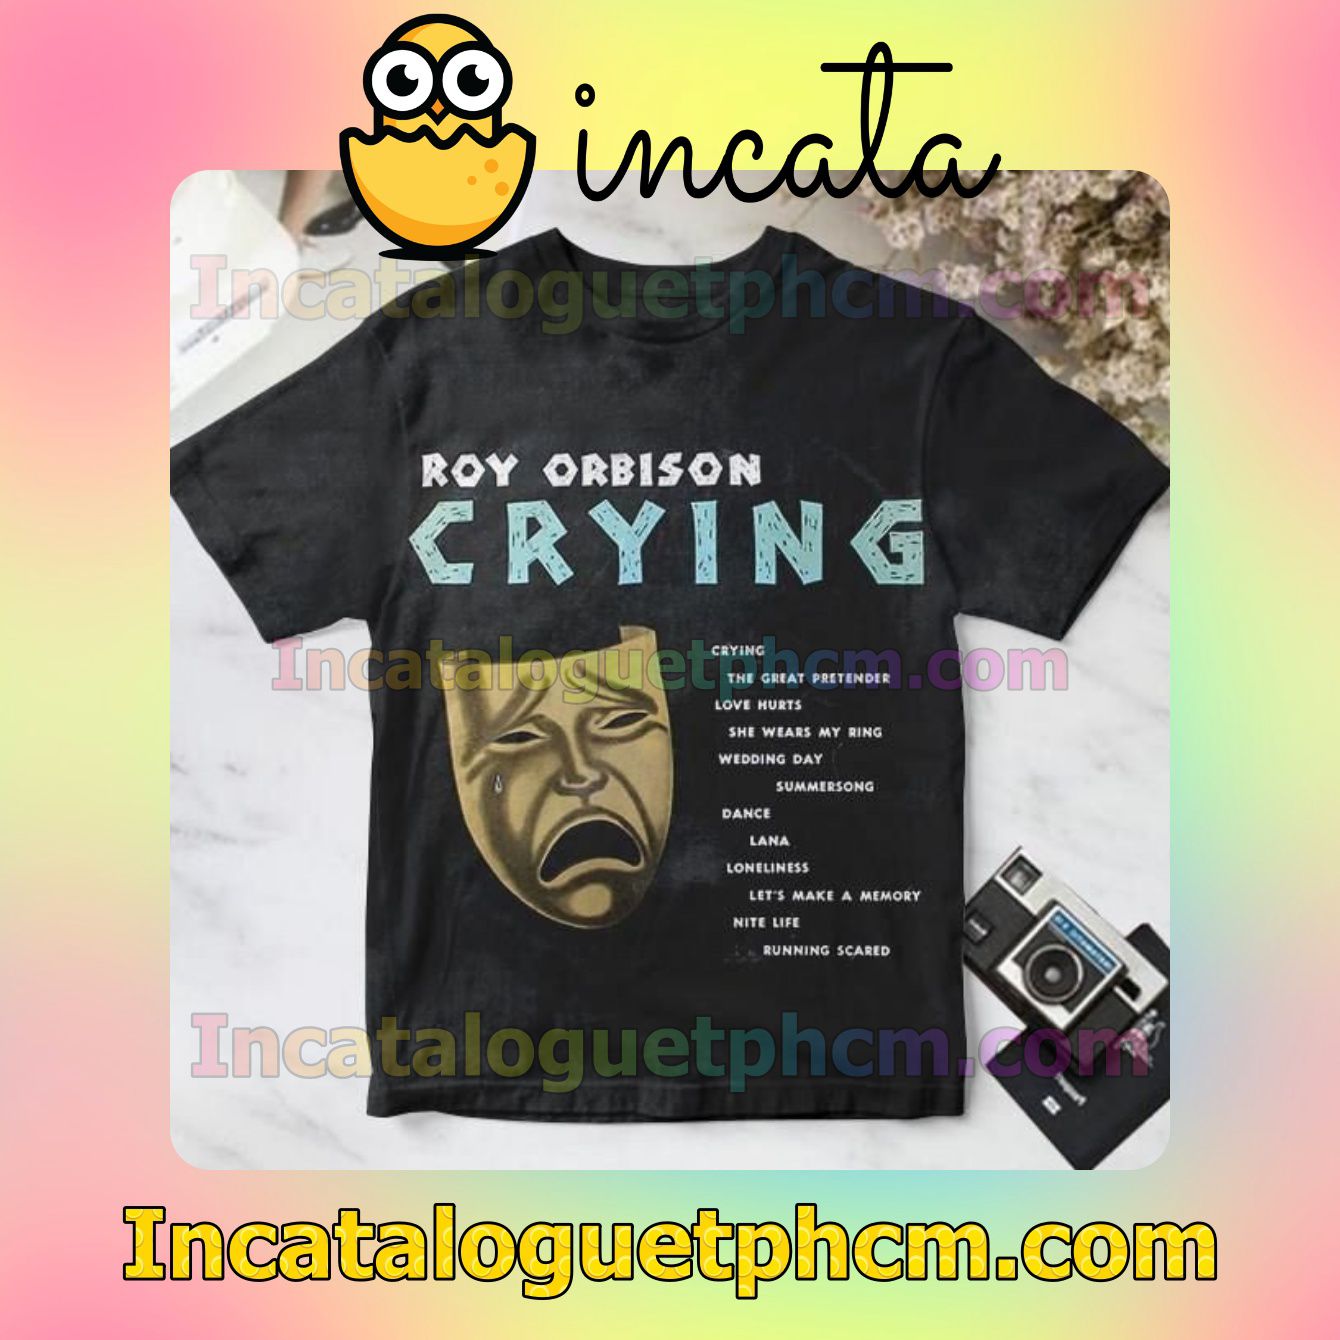 Roy Orbison Crying Album Cover For Fan Shirt